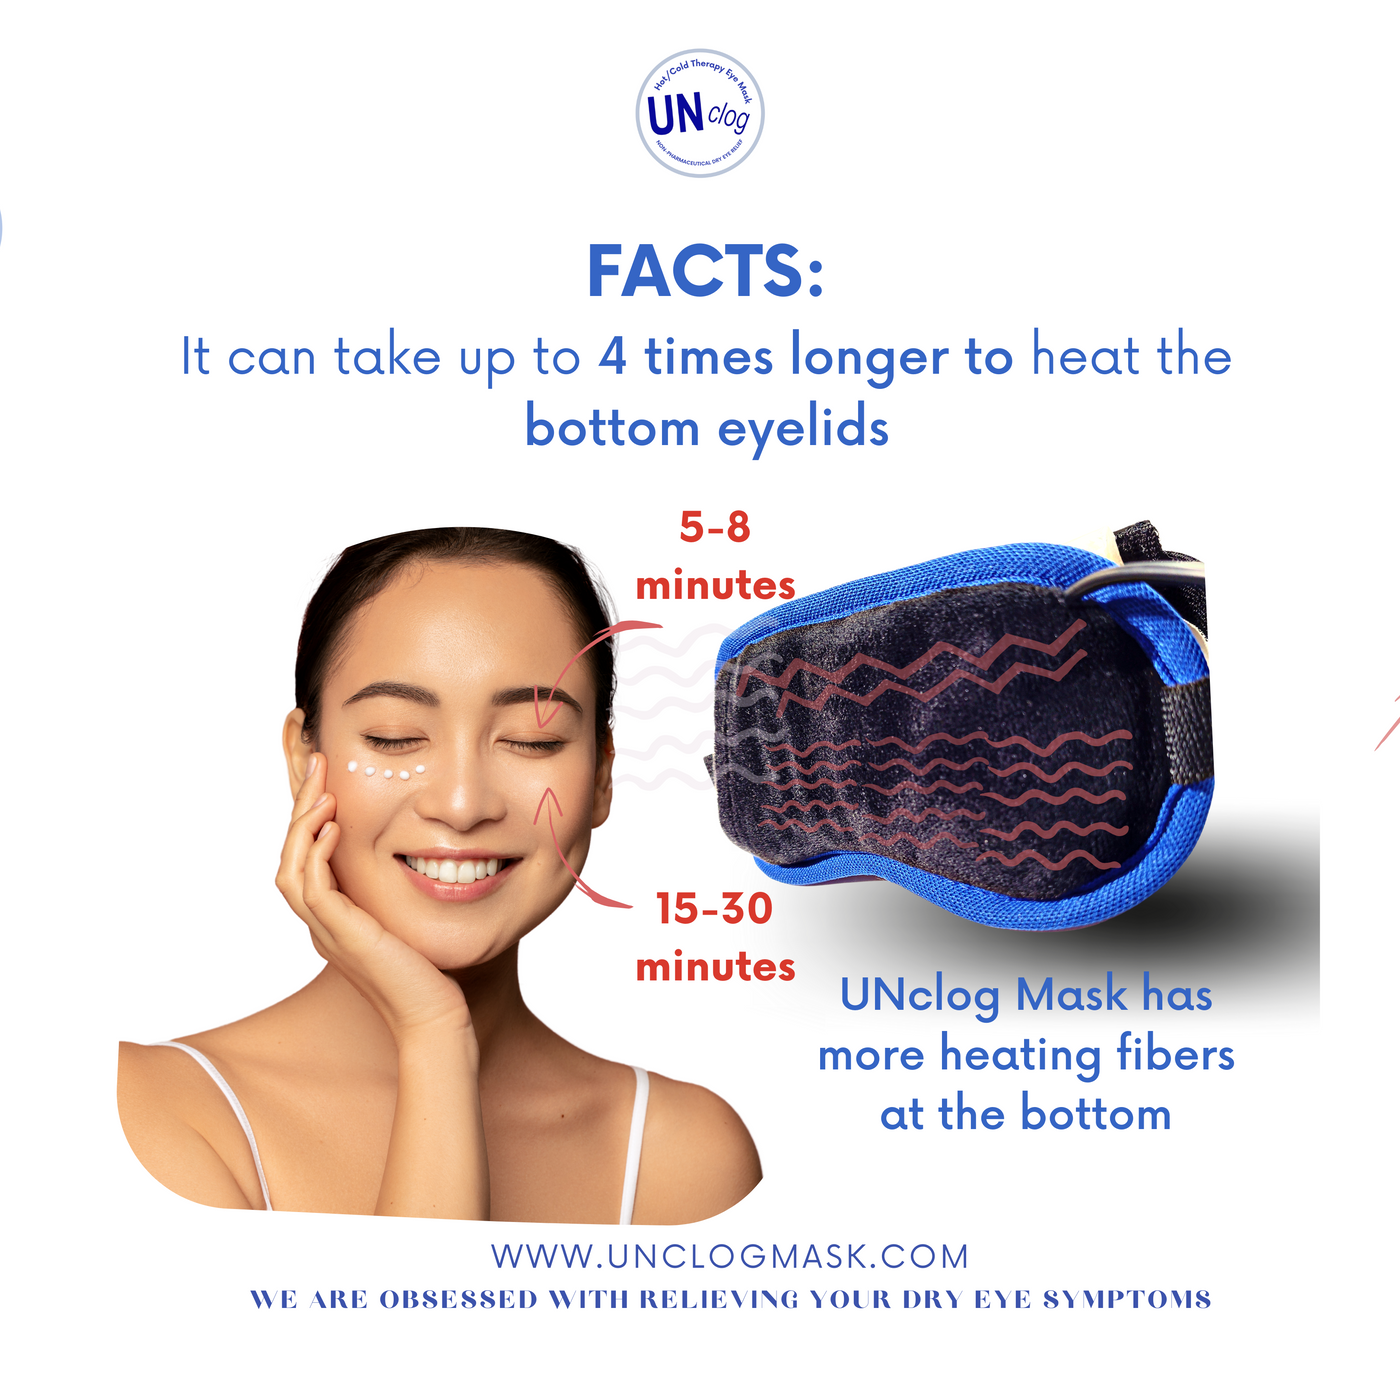 Here are the facts about our eye mask for dry eyes